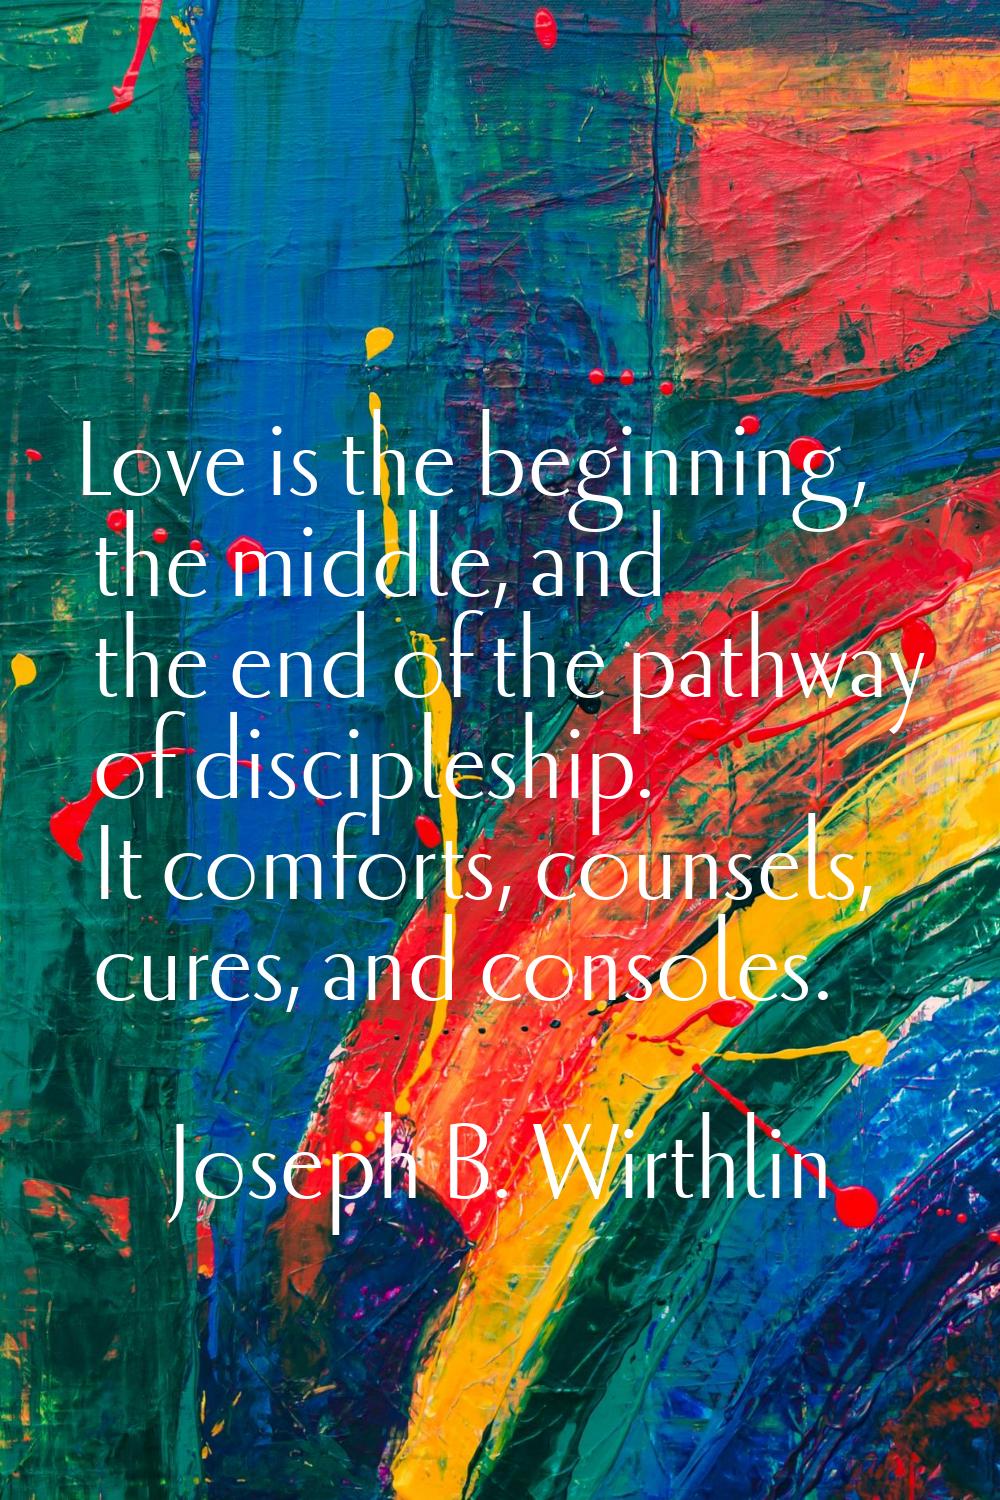 Love is the beginning, the middle, and the end of the pathway of discipleship. It comforts, counsel